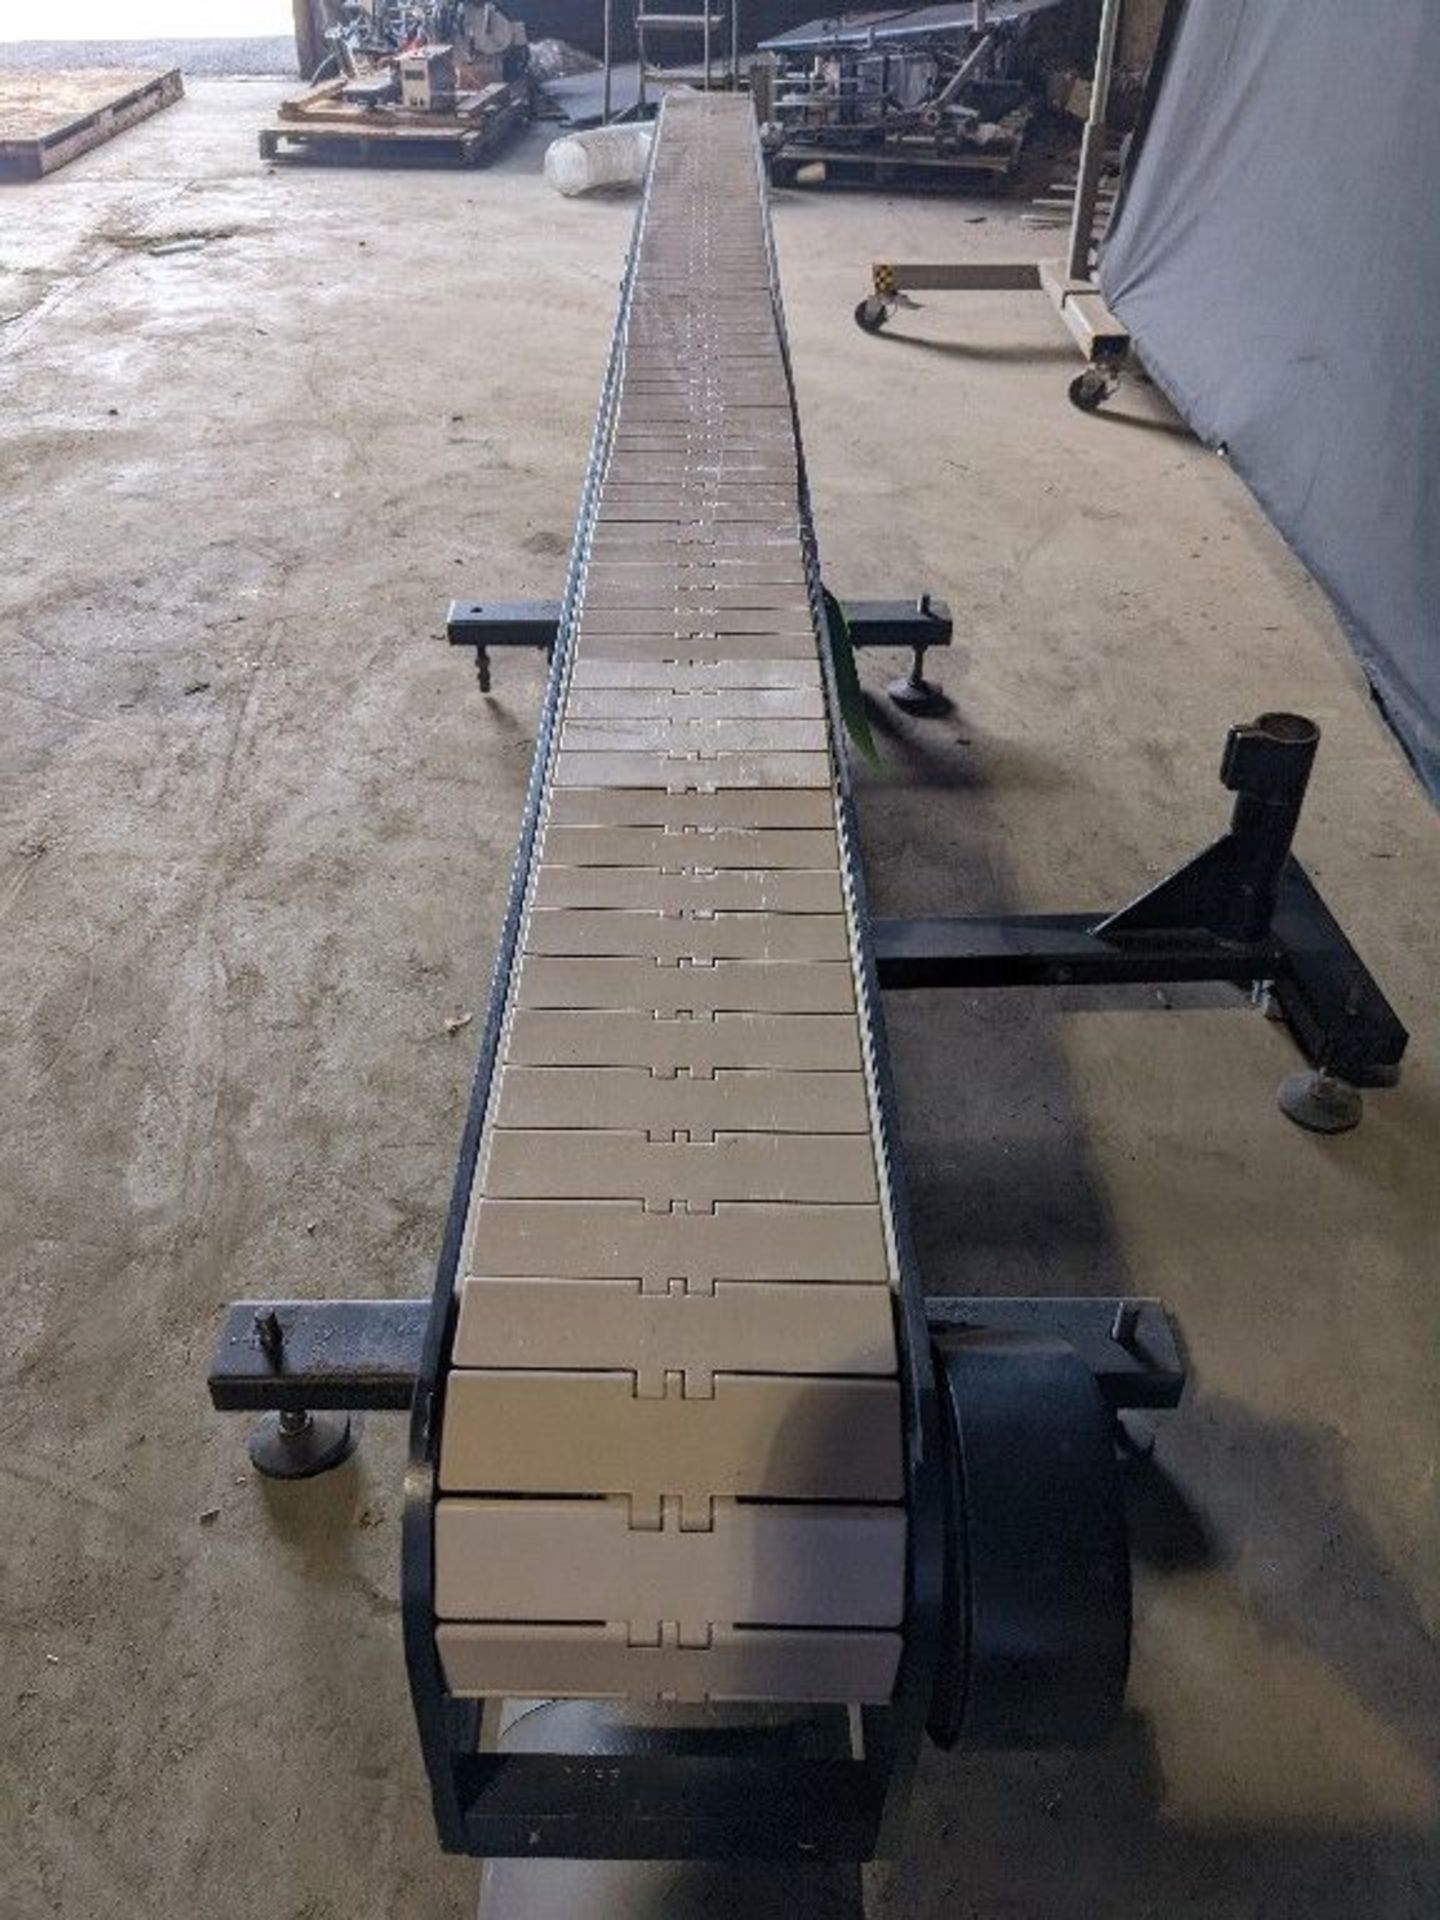 Qty (1) Tabletop Conveyor - 10' x 6' wide aluminum tabletop conveyor - 3 phase 1 hp drive. - Power - Image 3 of 4